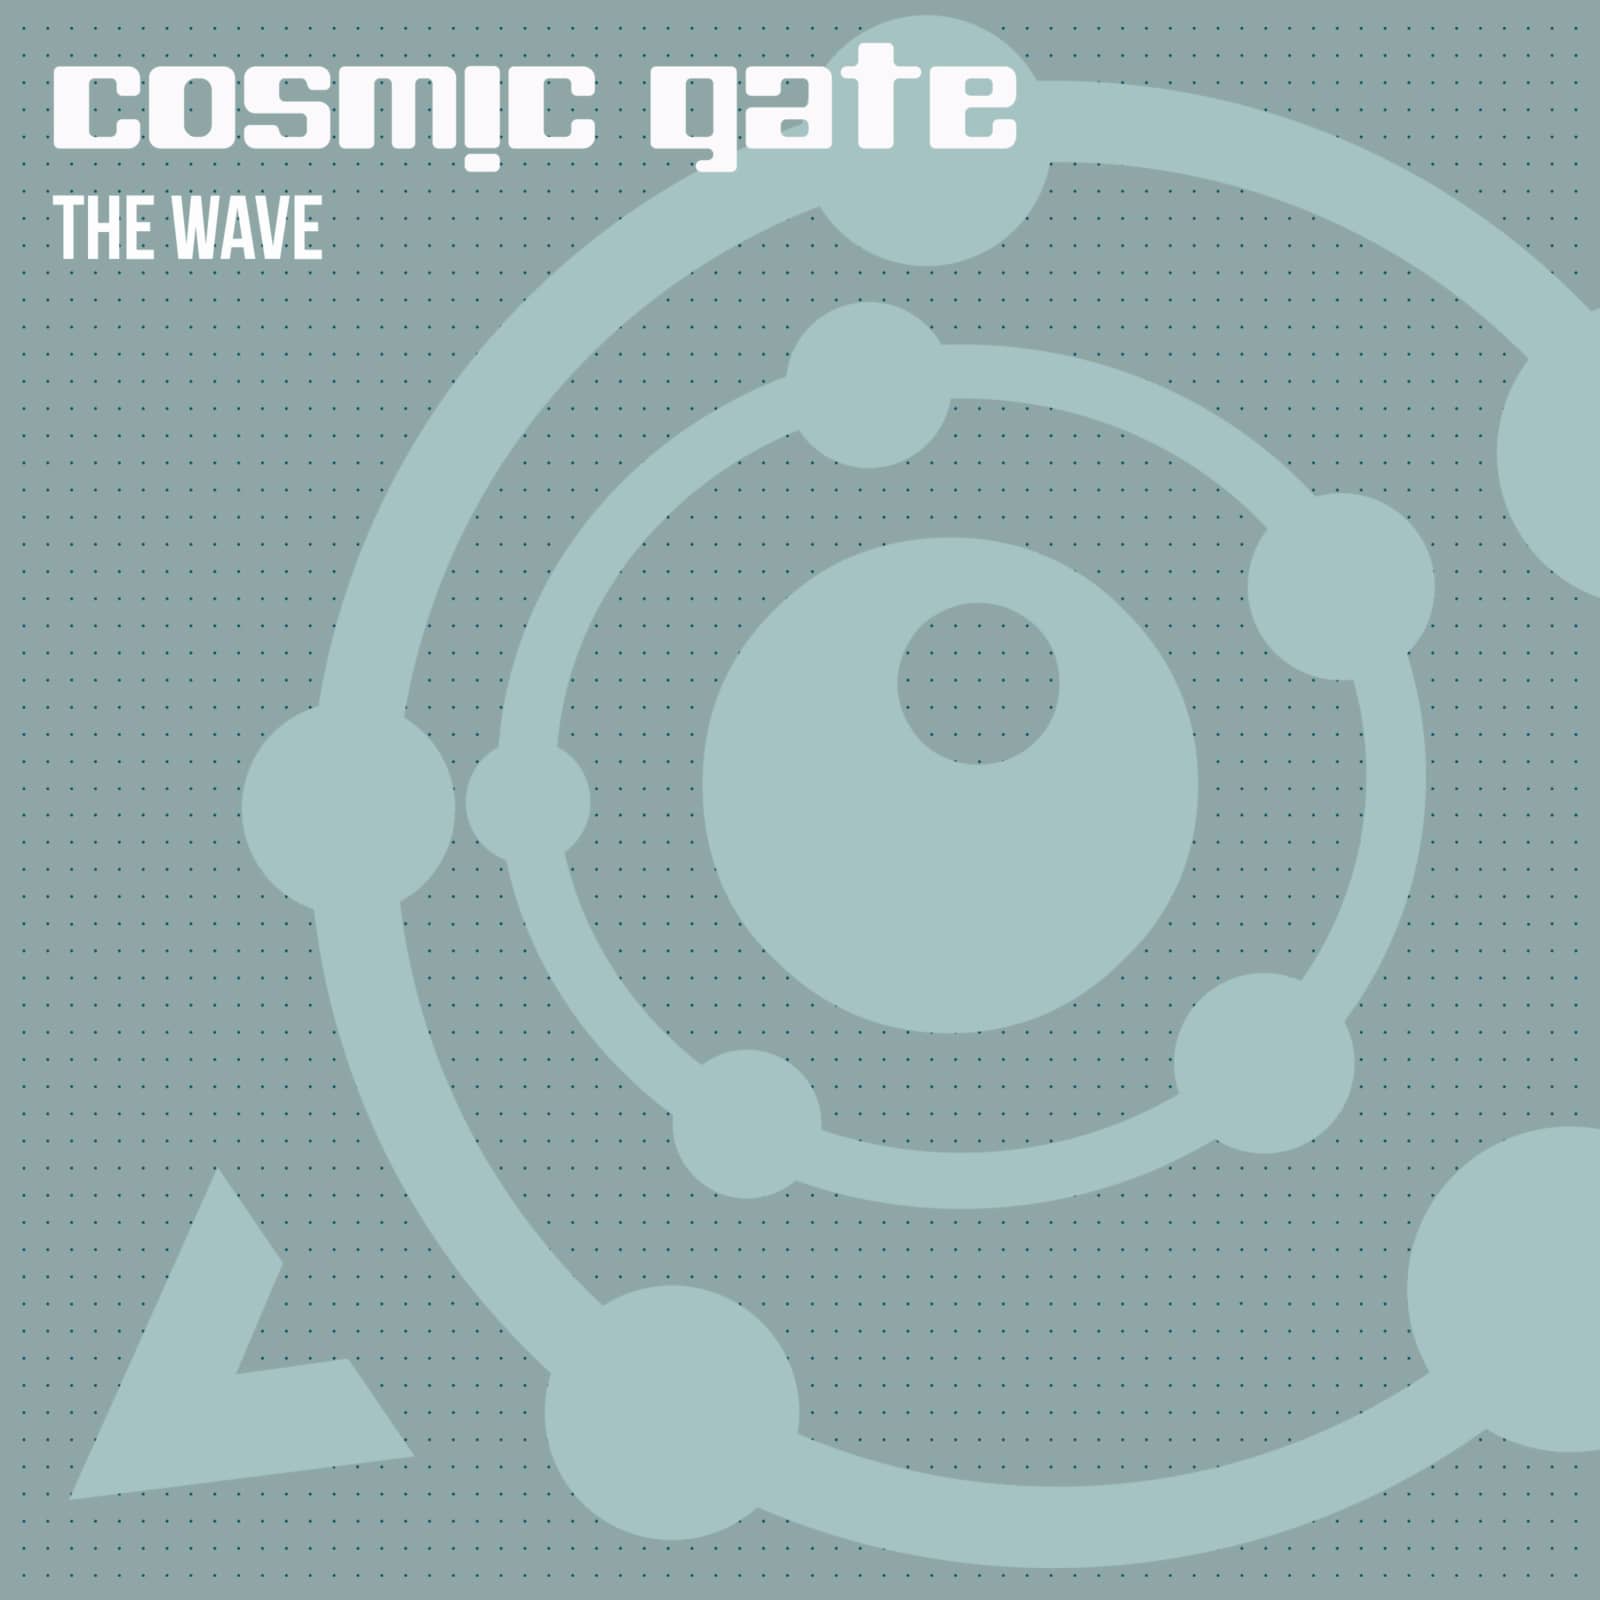 New wave 007. Cosmic Gate. Cover Cosmic Gate. Группа Cosmic Gate альбомы. Cosmic Gate надпись.